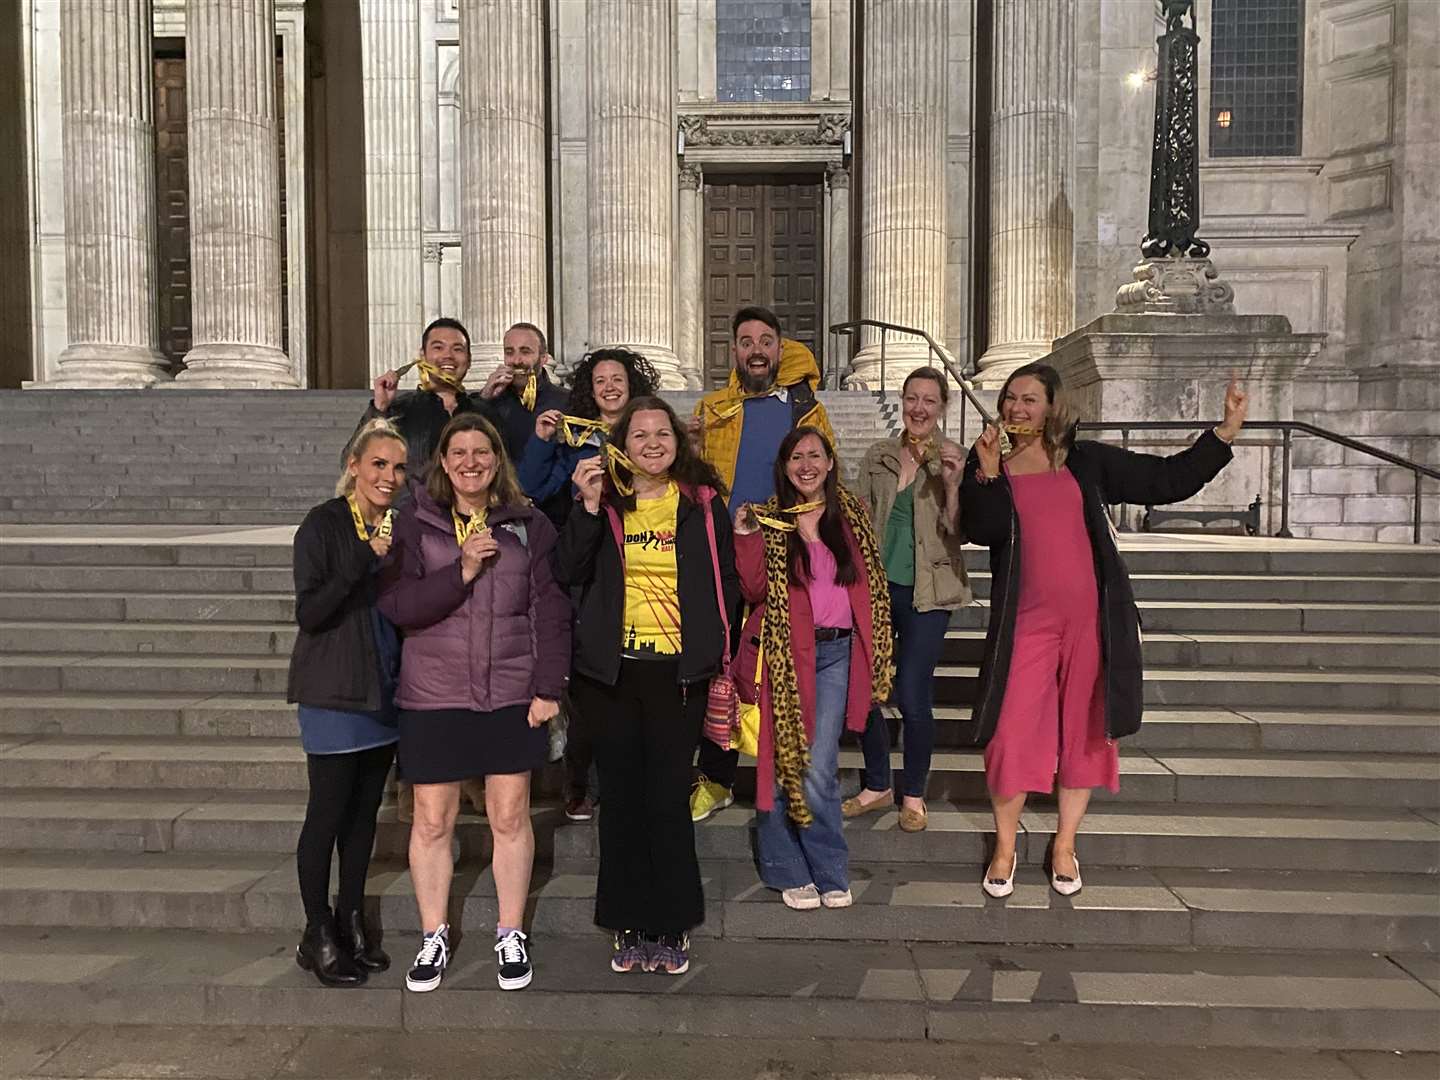 Wendy Morgan (far right in pink) and her group on the steps of St Paul’s Cathedral.